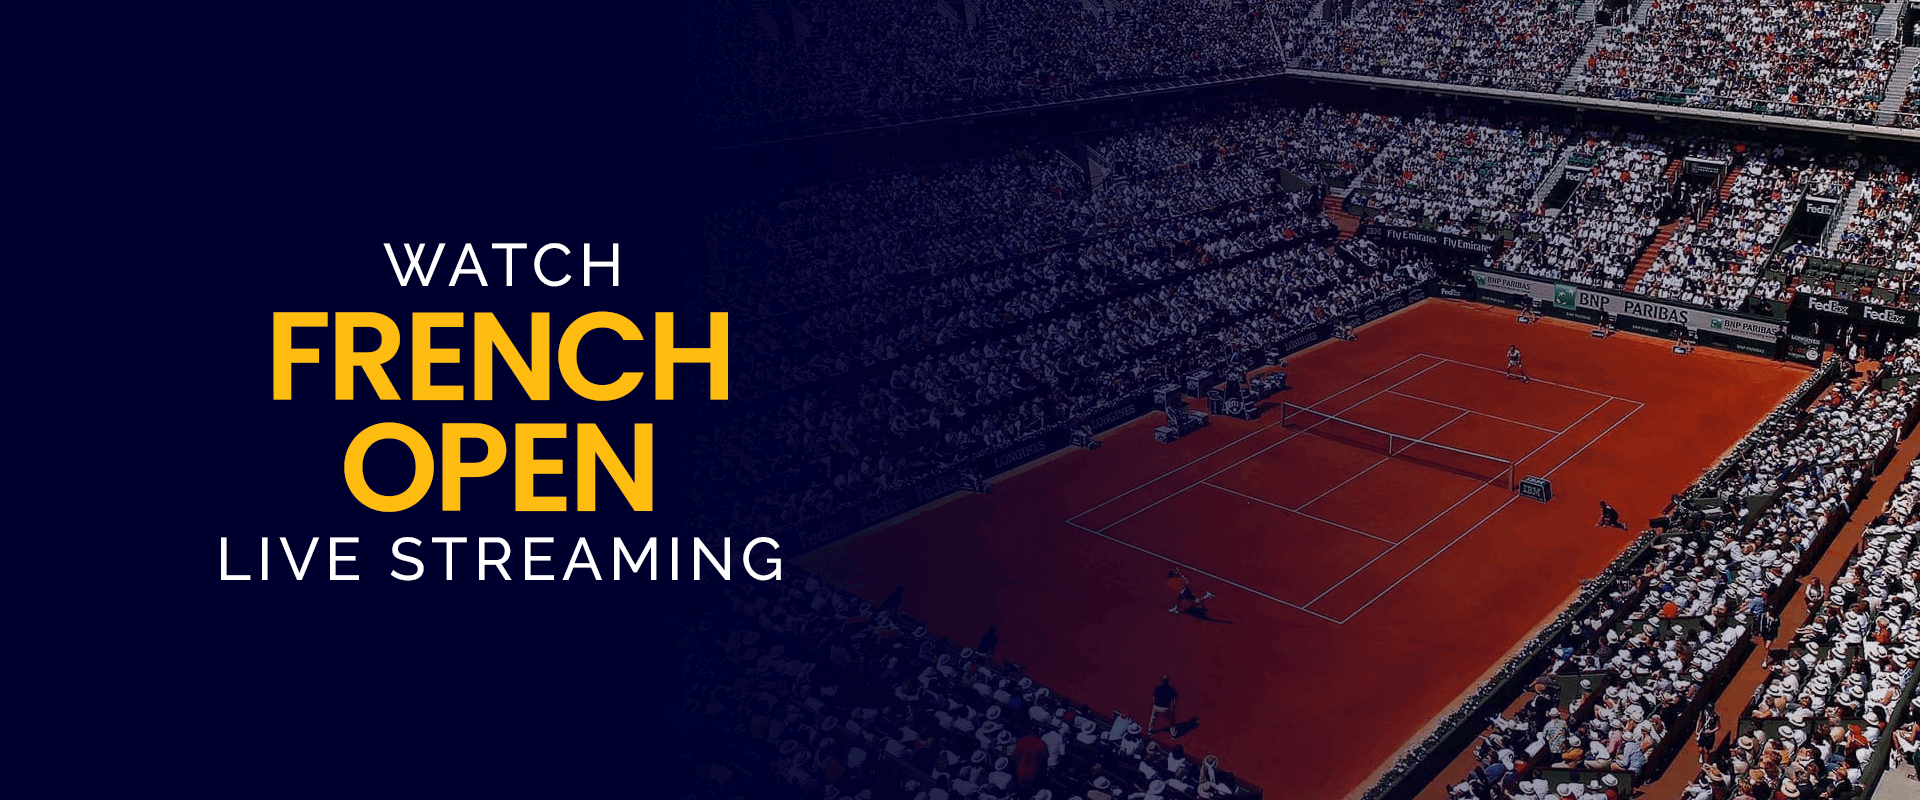 How to Watch French Open Live Streaming